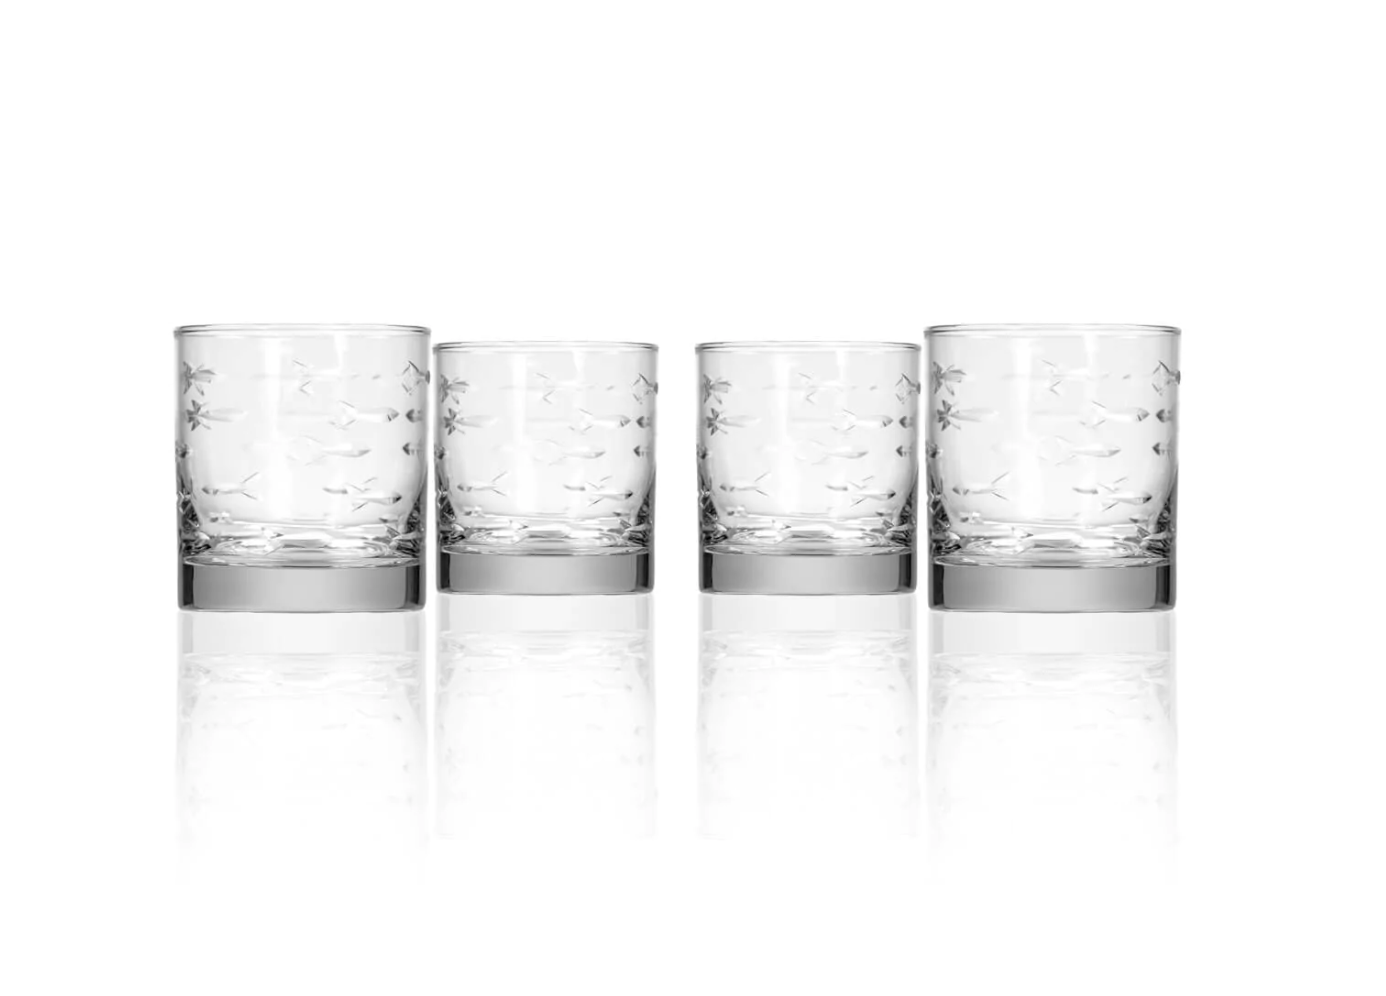 School of Fish 8.5oz Stemless Champagne Flute | Set of 4 | Rolf Glass